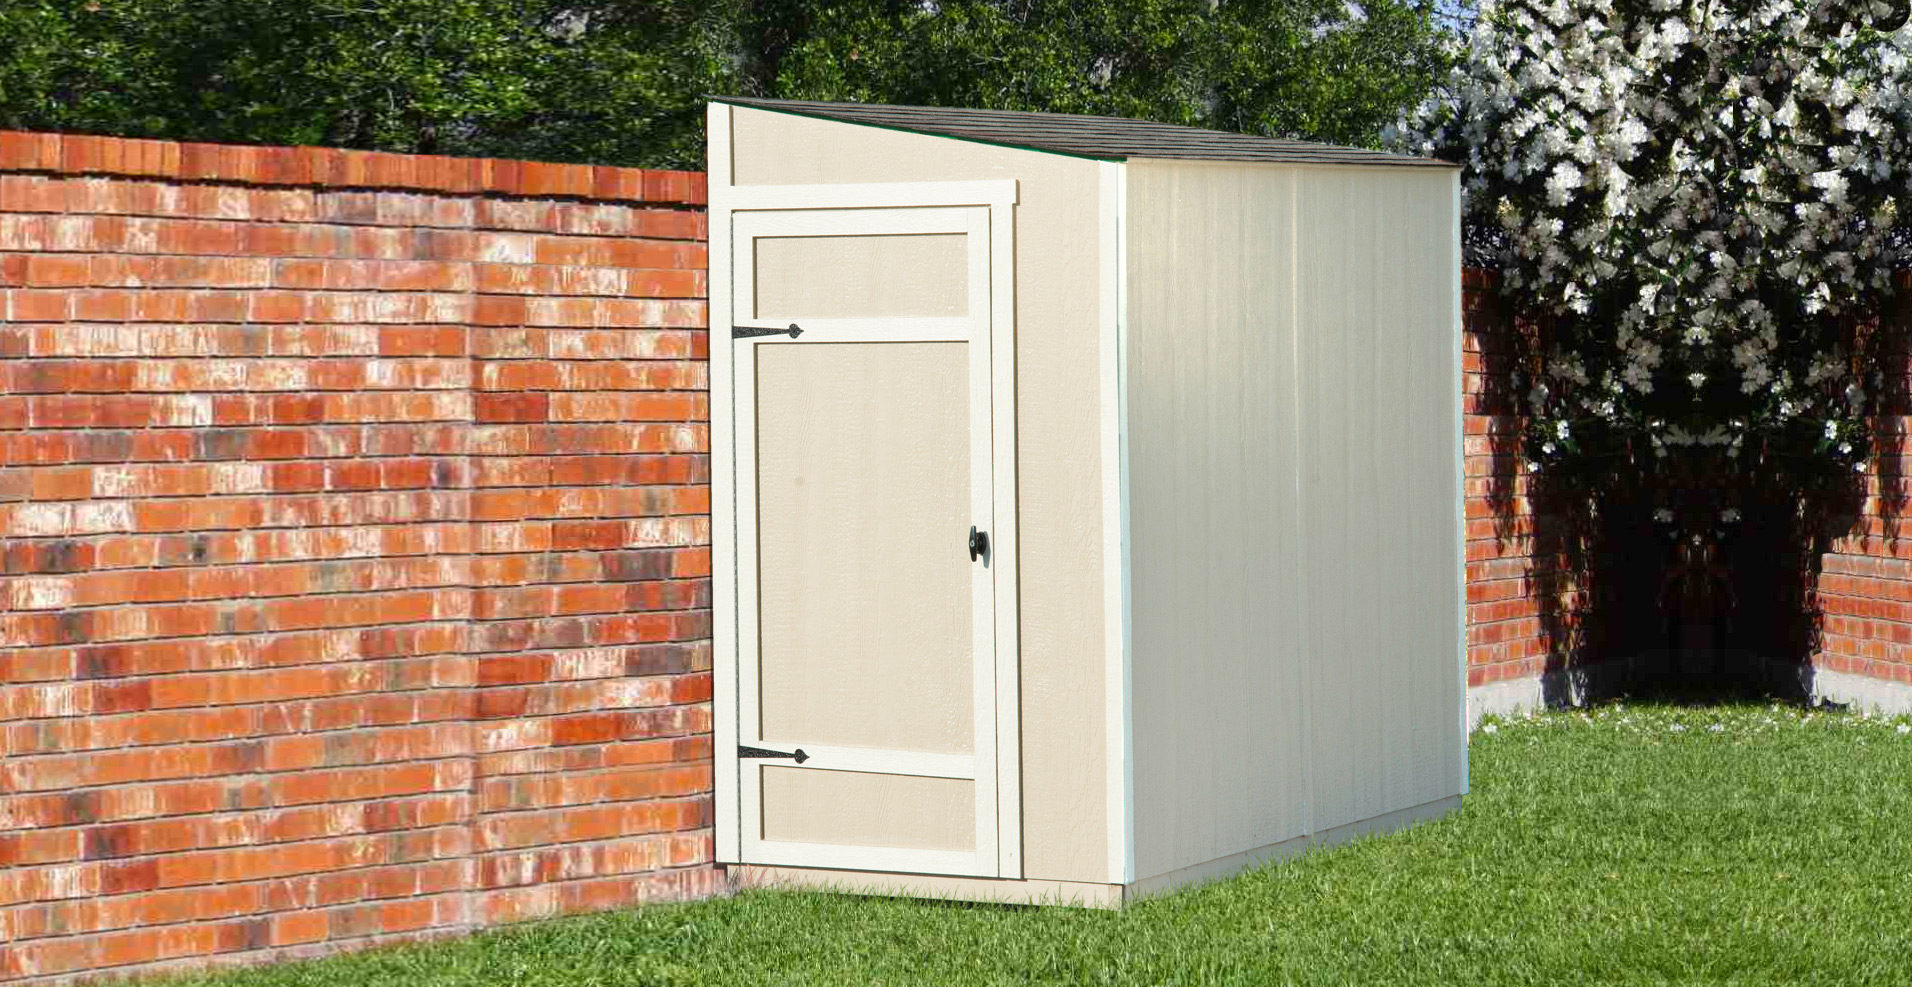 8x10 storage shed costco ~ Section sheds